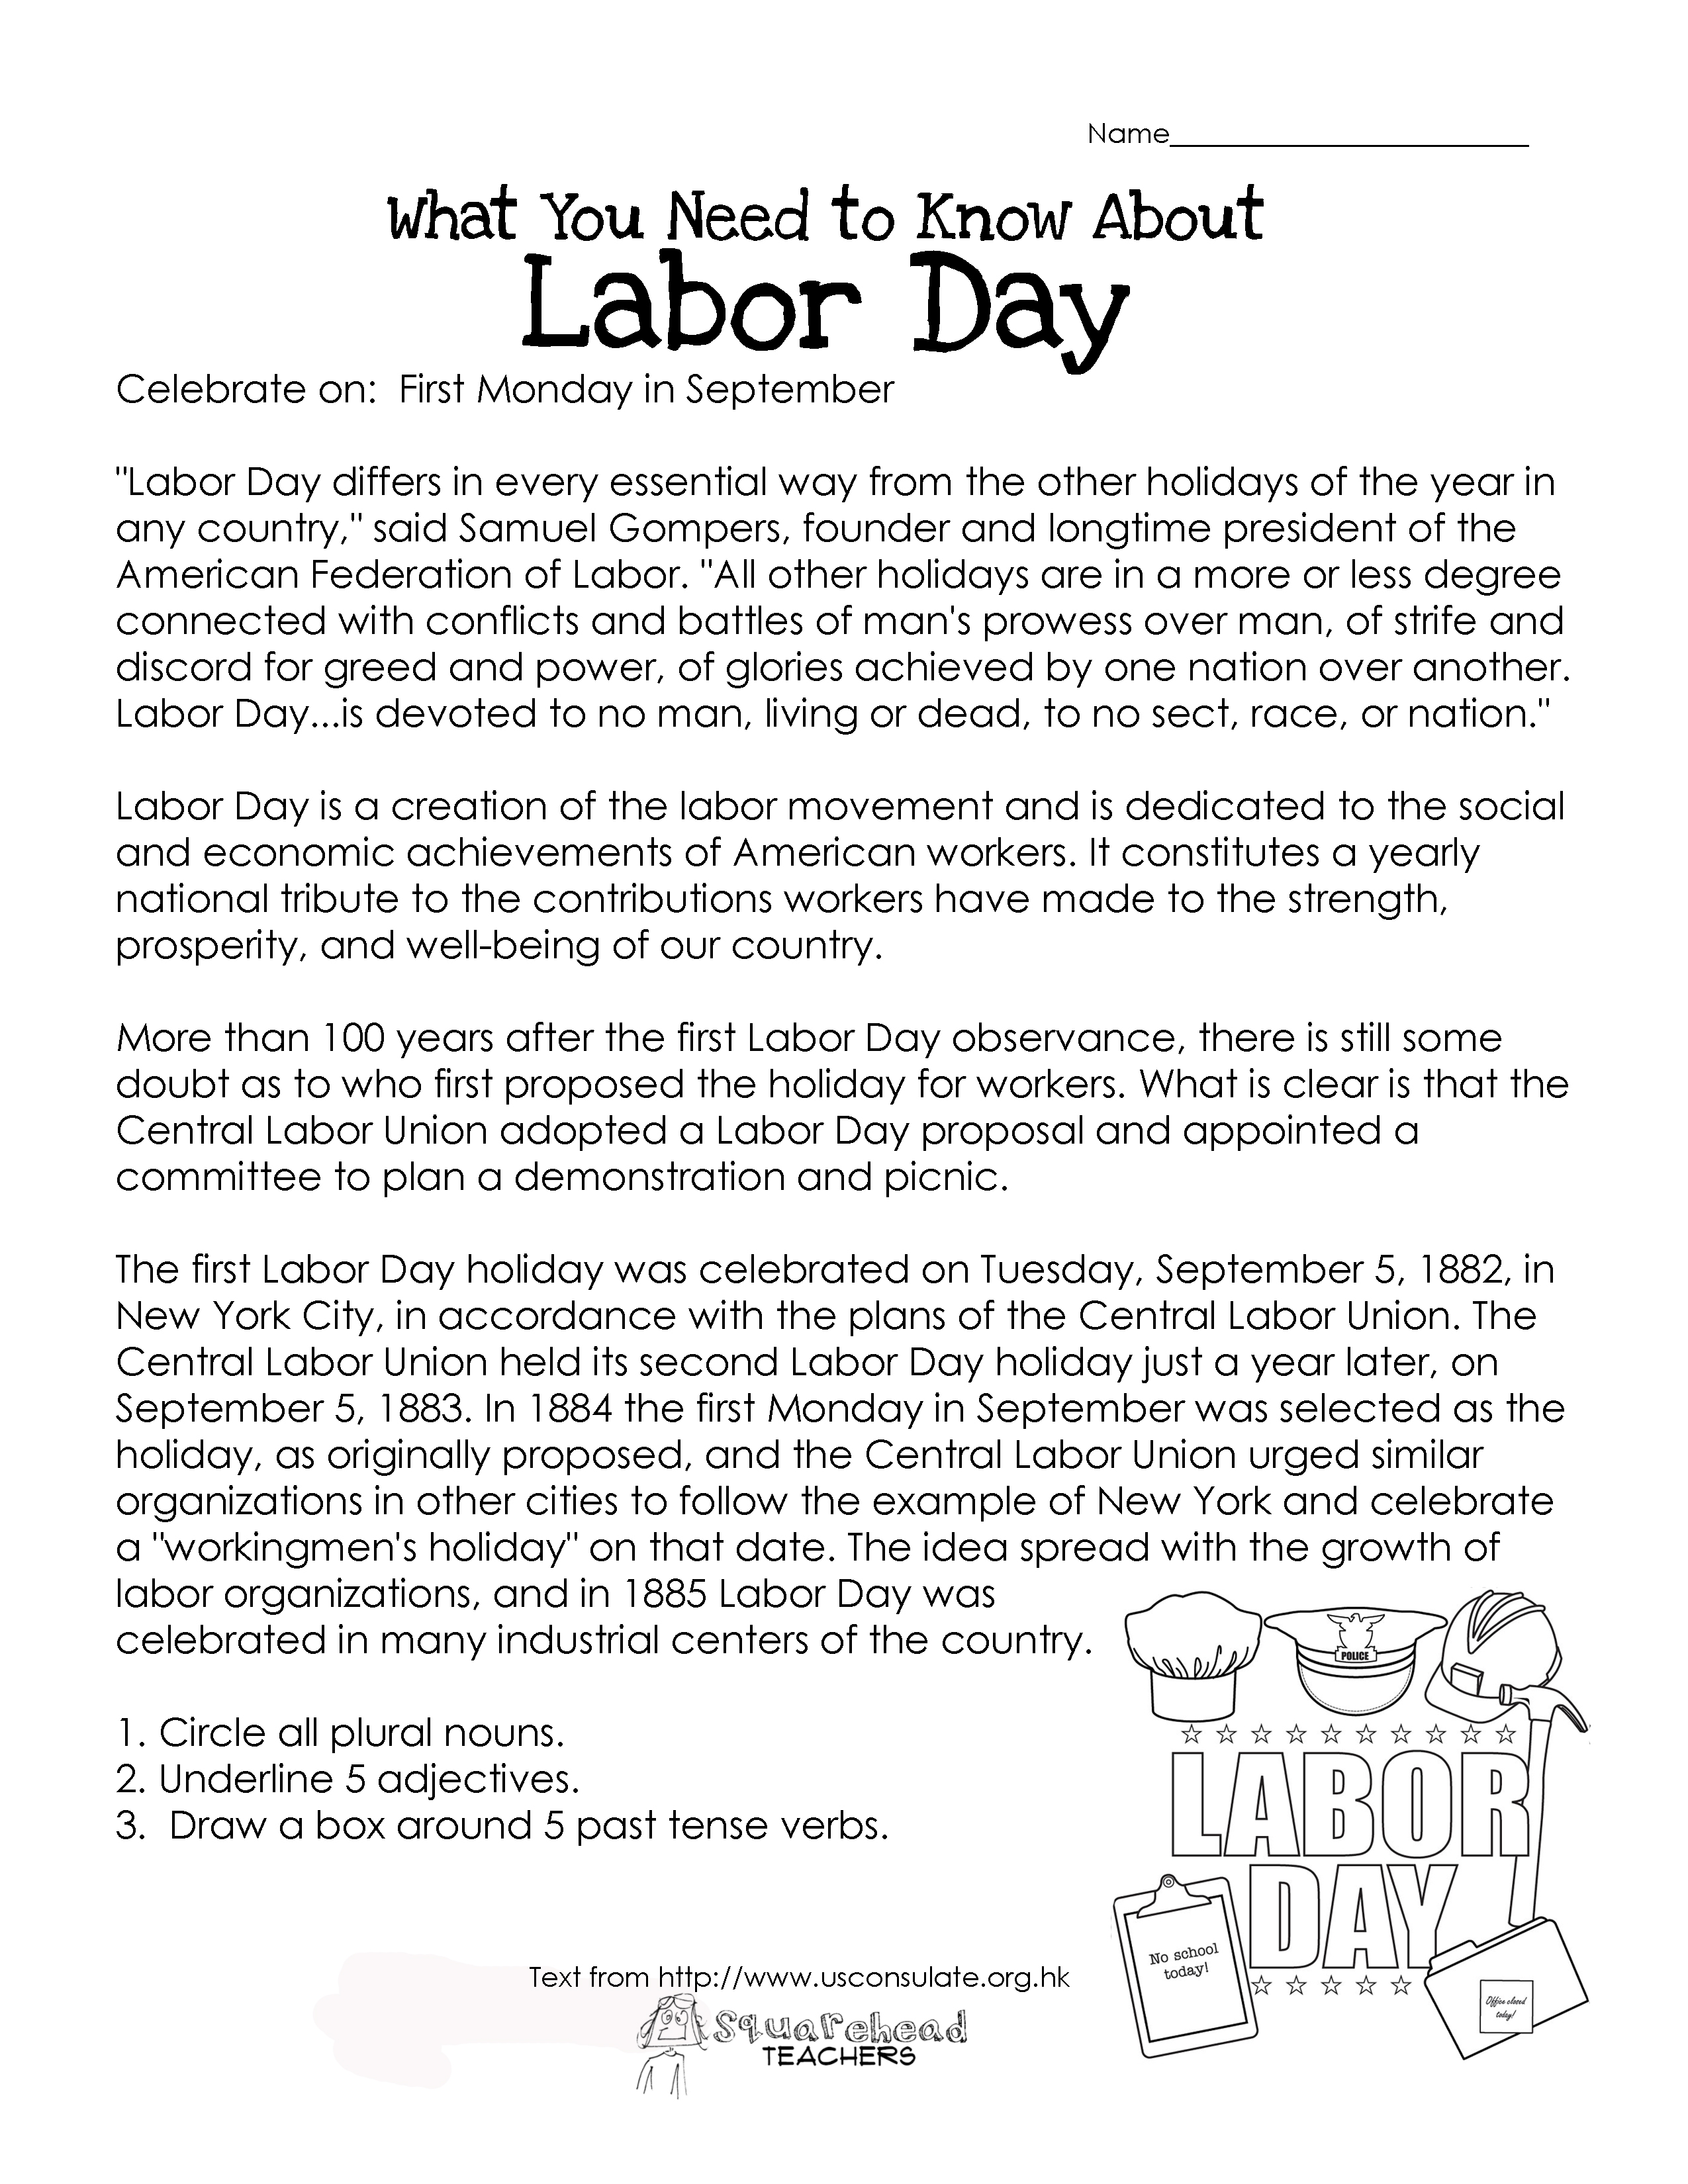 labor-day-printable-activities